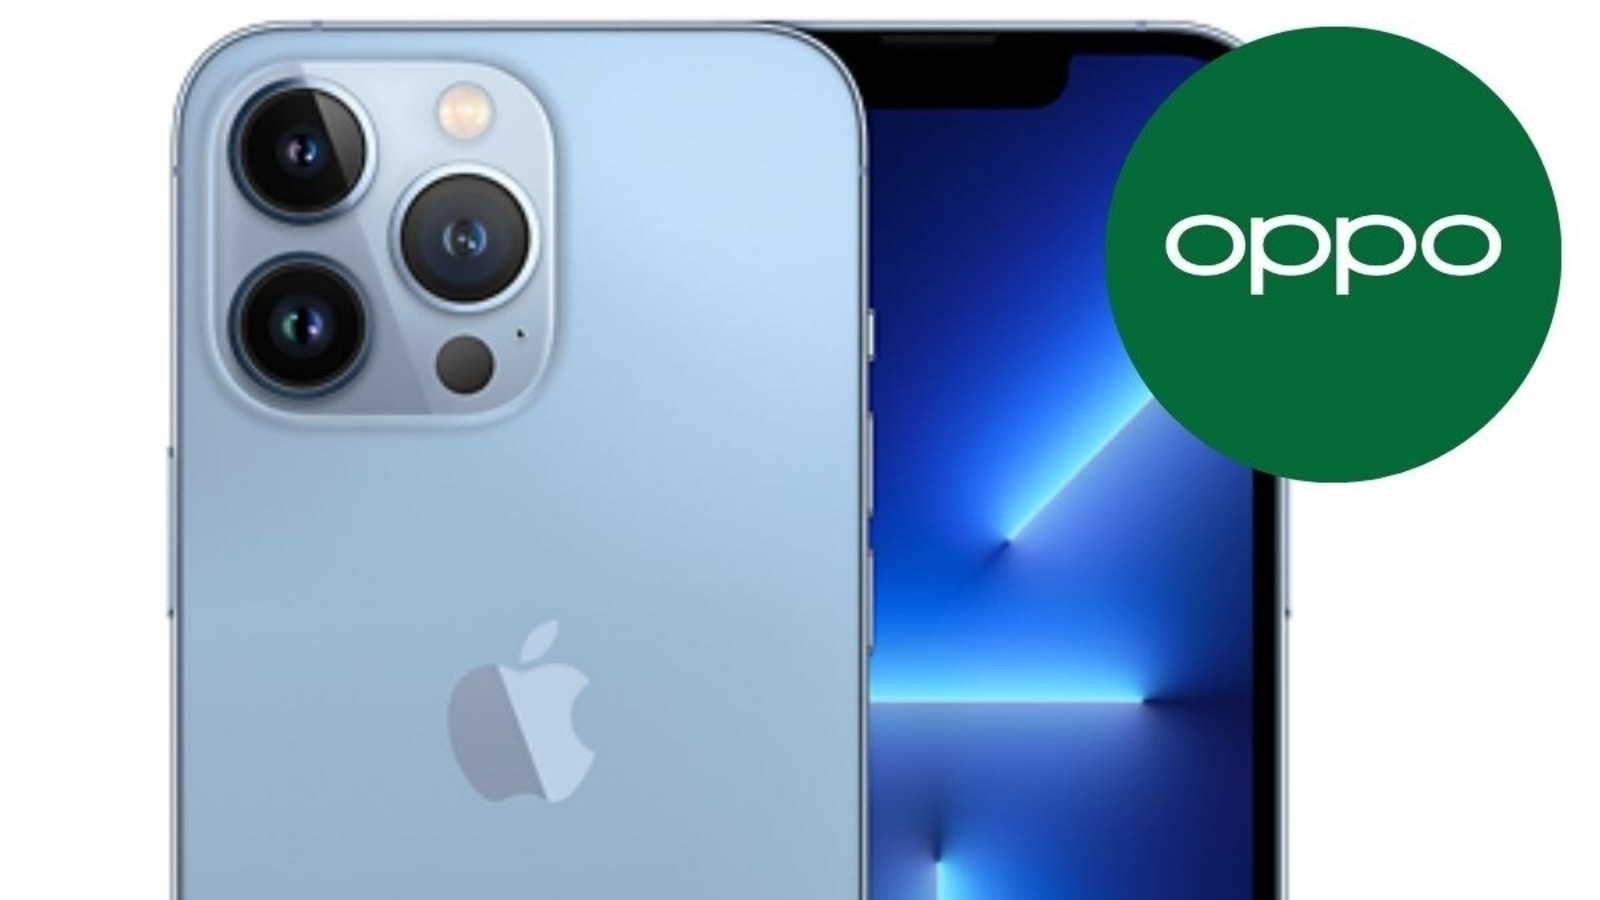 Camera Shootout: Oppo Find X5 Pro Goes Up Against The iPhone 13 Pro